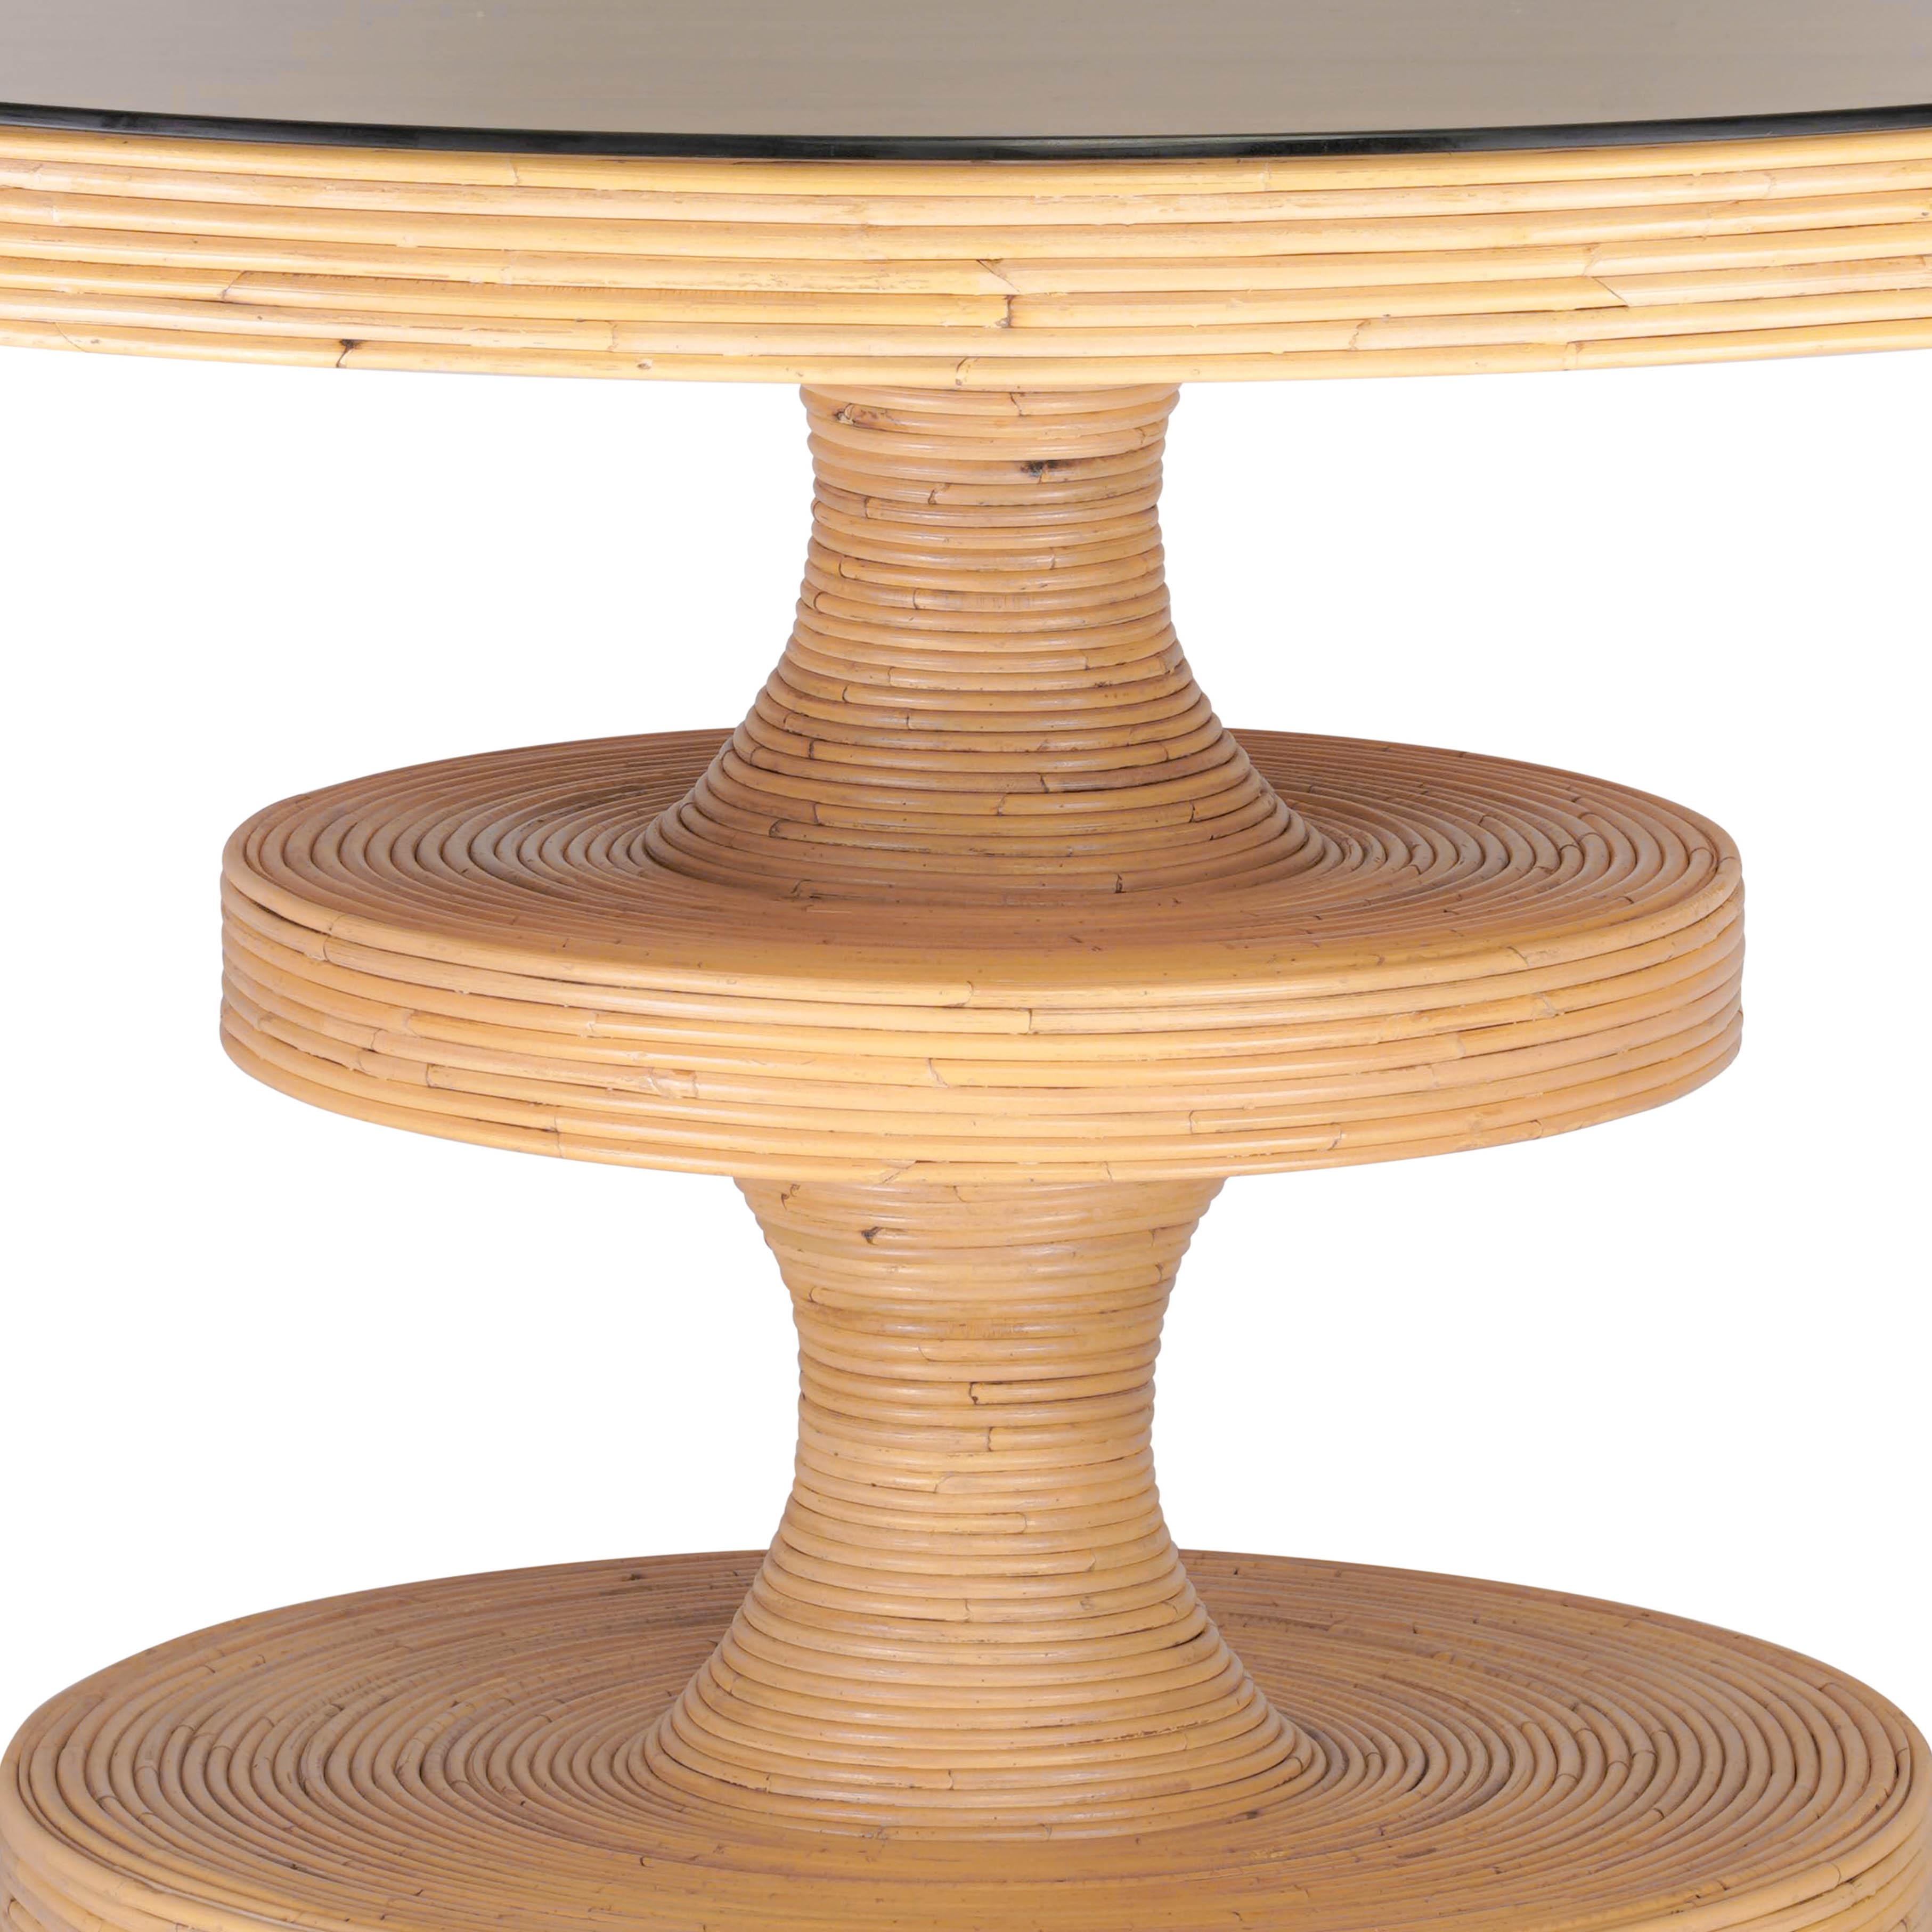 Apollonia Natural Rattan Round Dining Table - Image 3